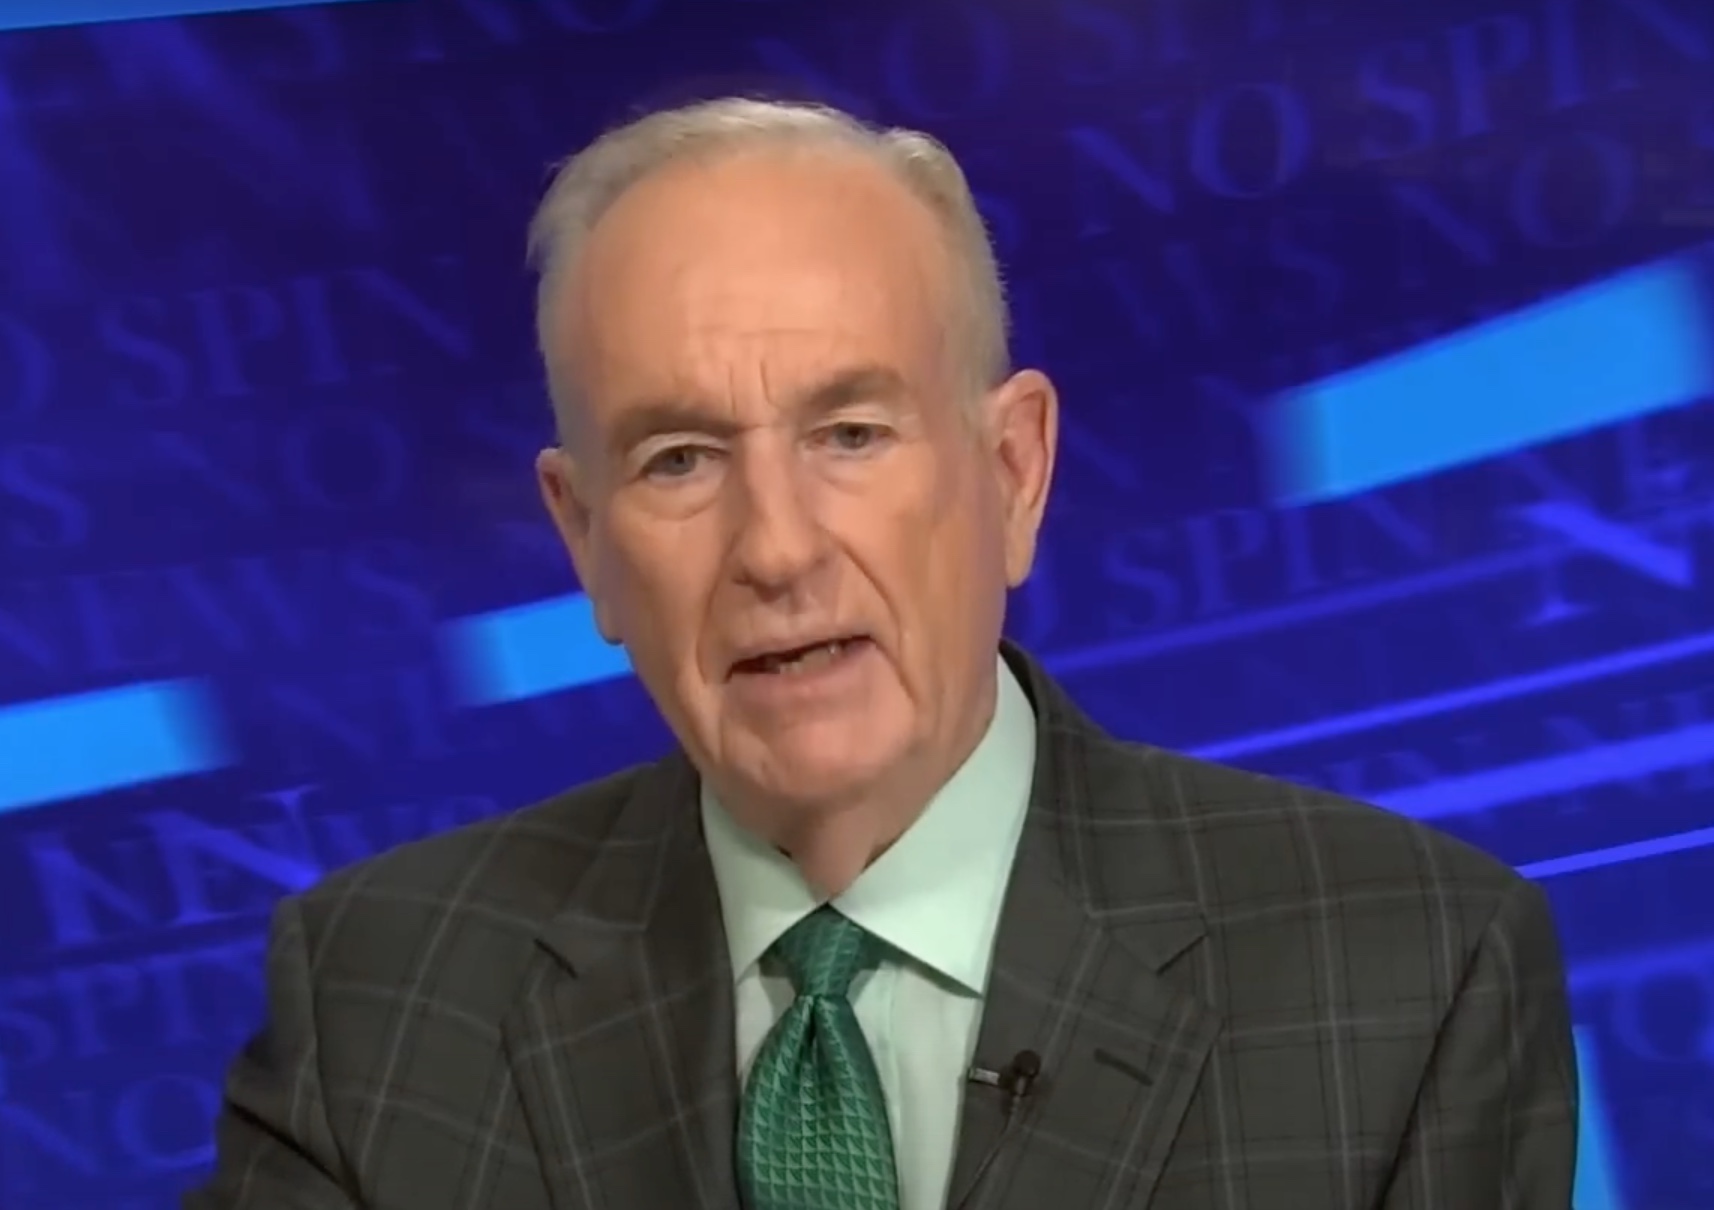 Bill O’Reilly Outraged After School District Pulls His Books Under Florida Law He Supported: ‘It’s Absurd’ (mediaite.com)